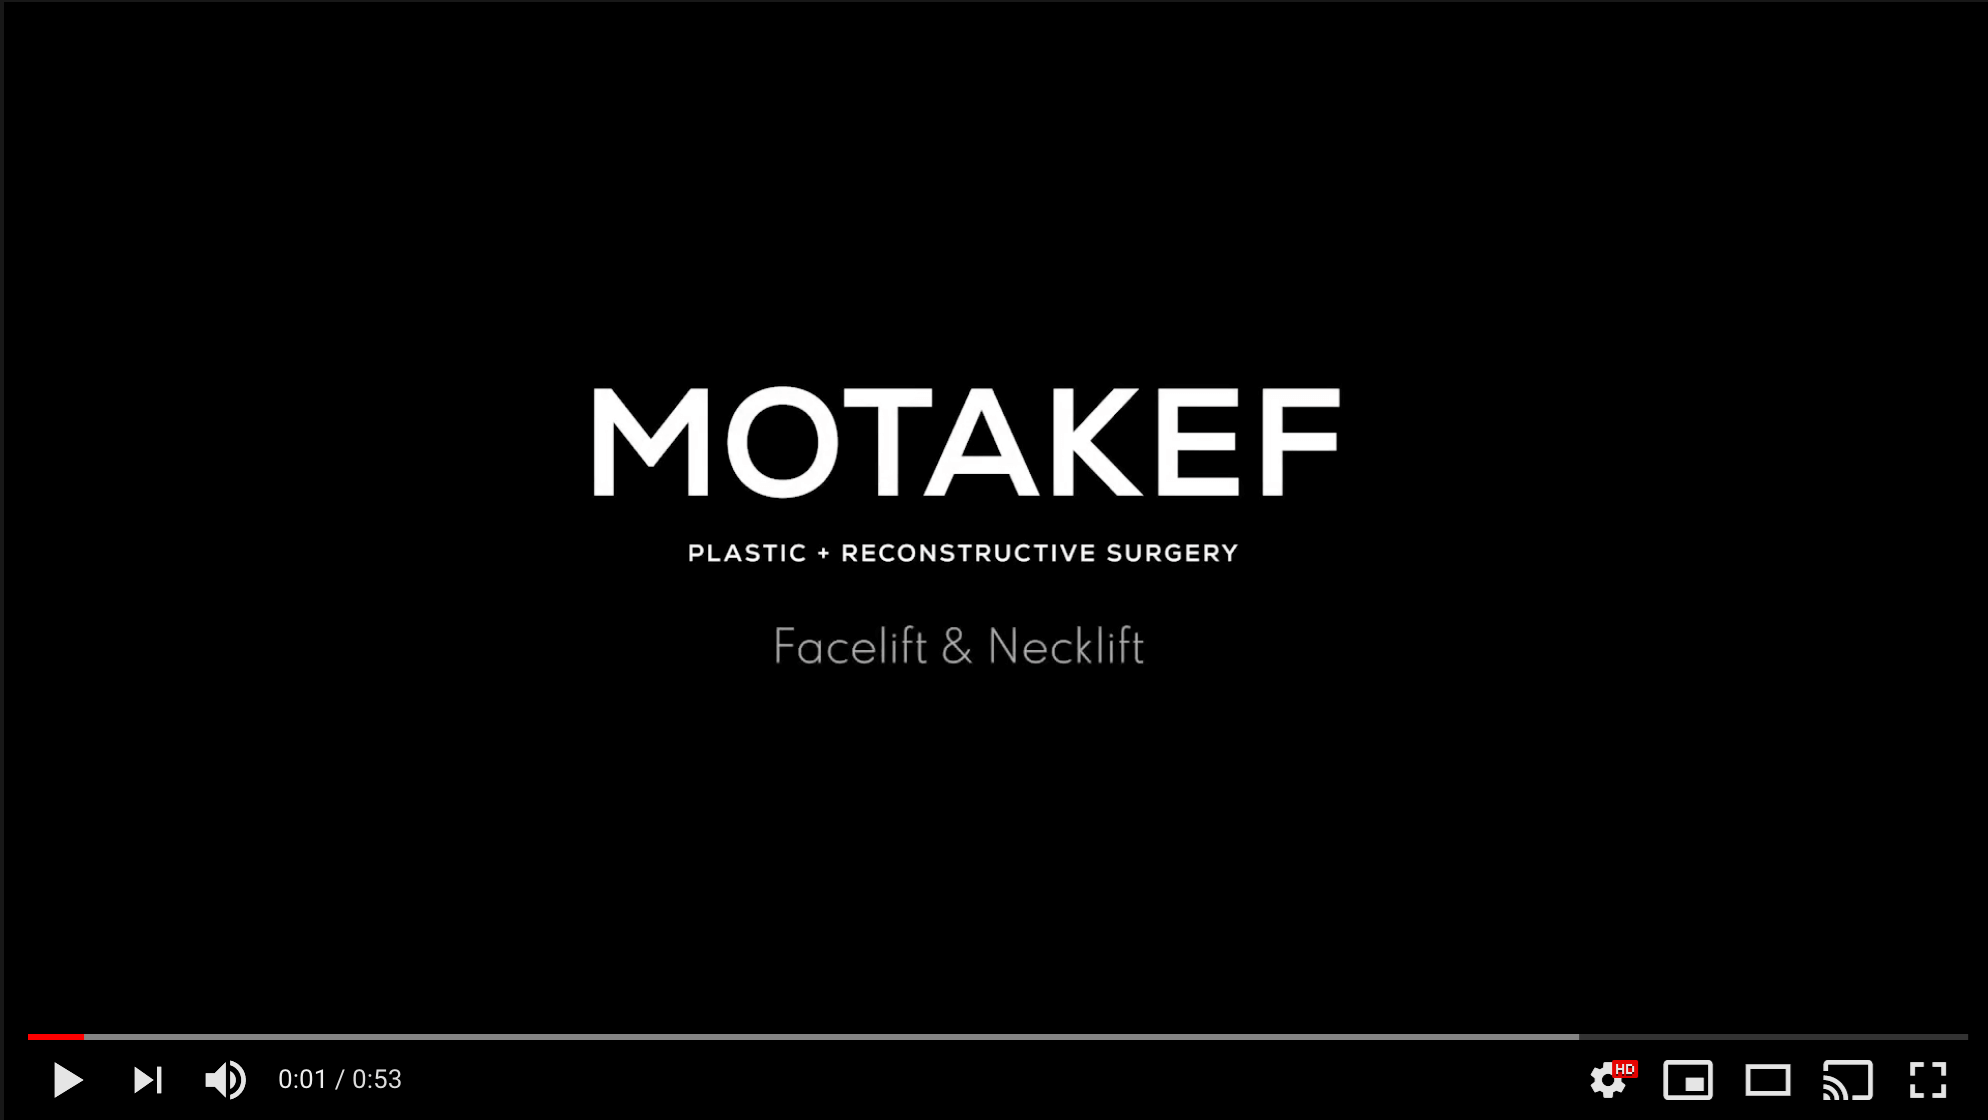 Facelift at Motakef Plastic and Reconstructive Surgery